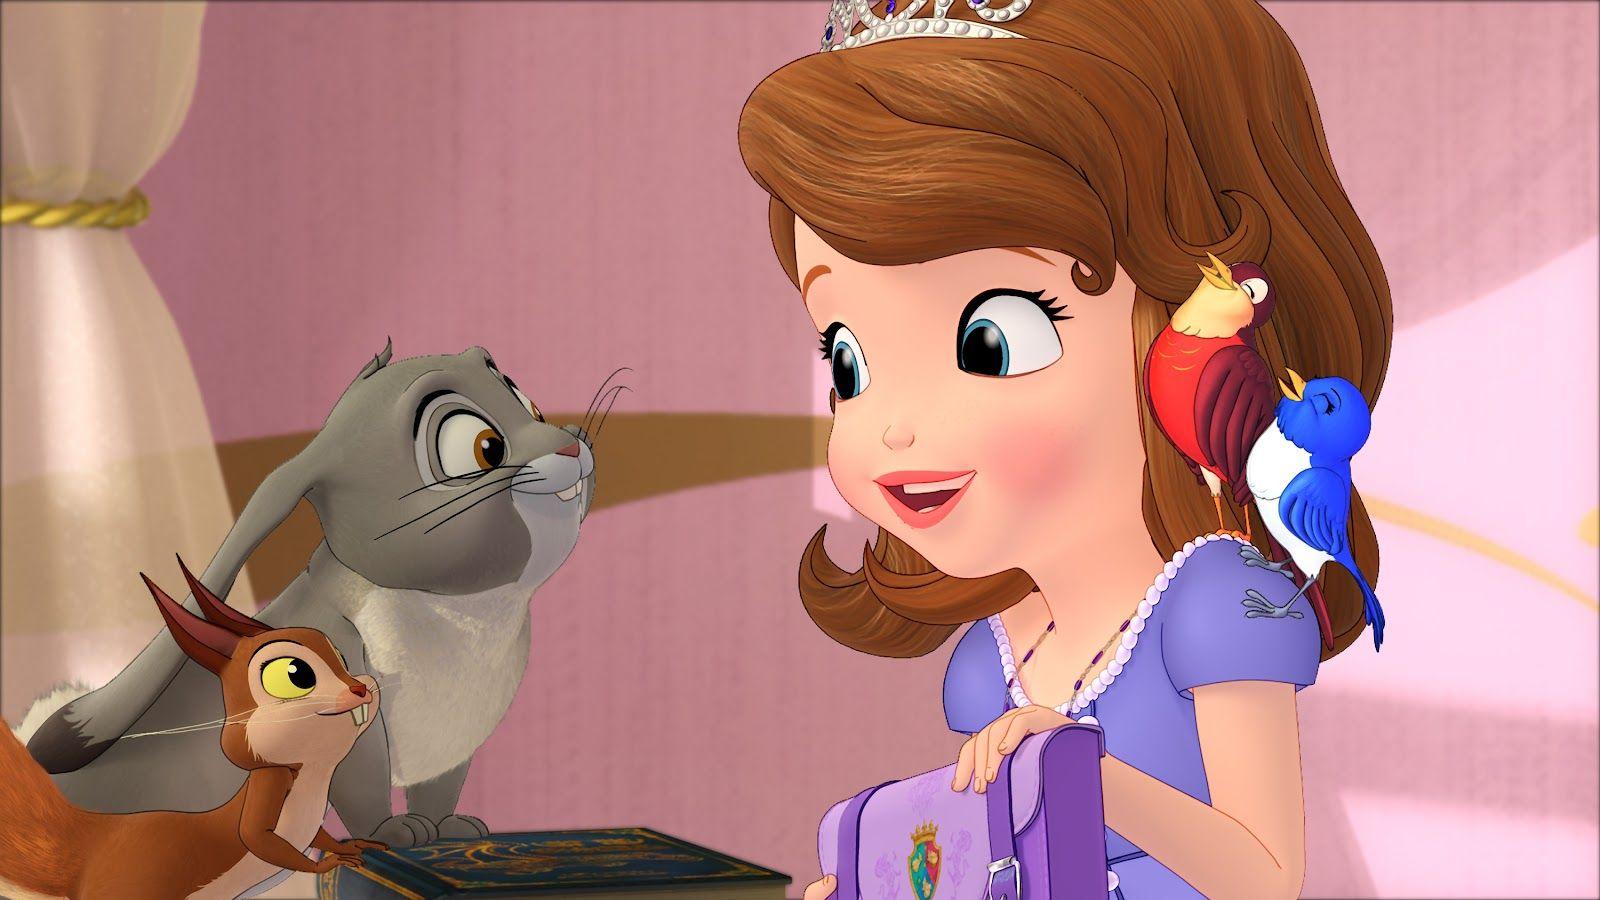 Kids Cartoons: New Sofia the first once upon a princess full video